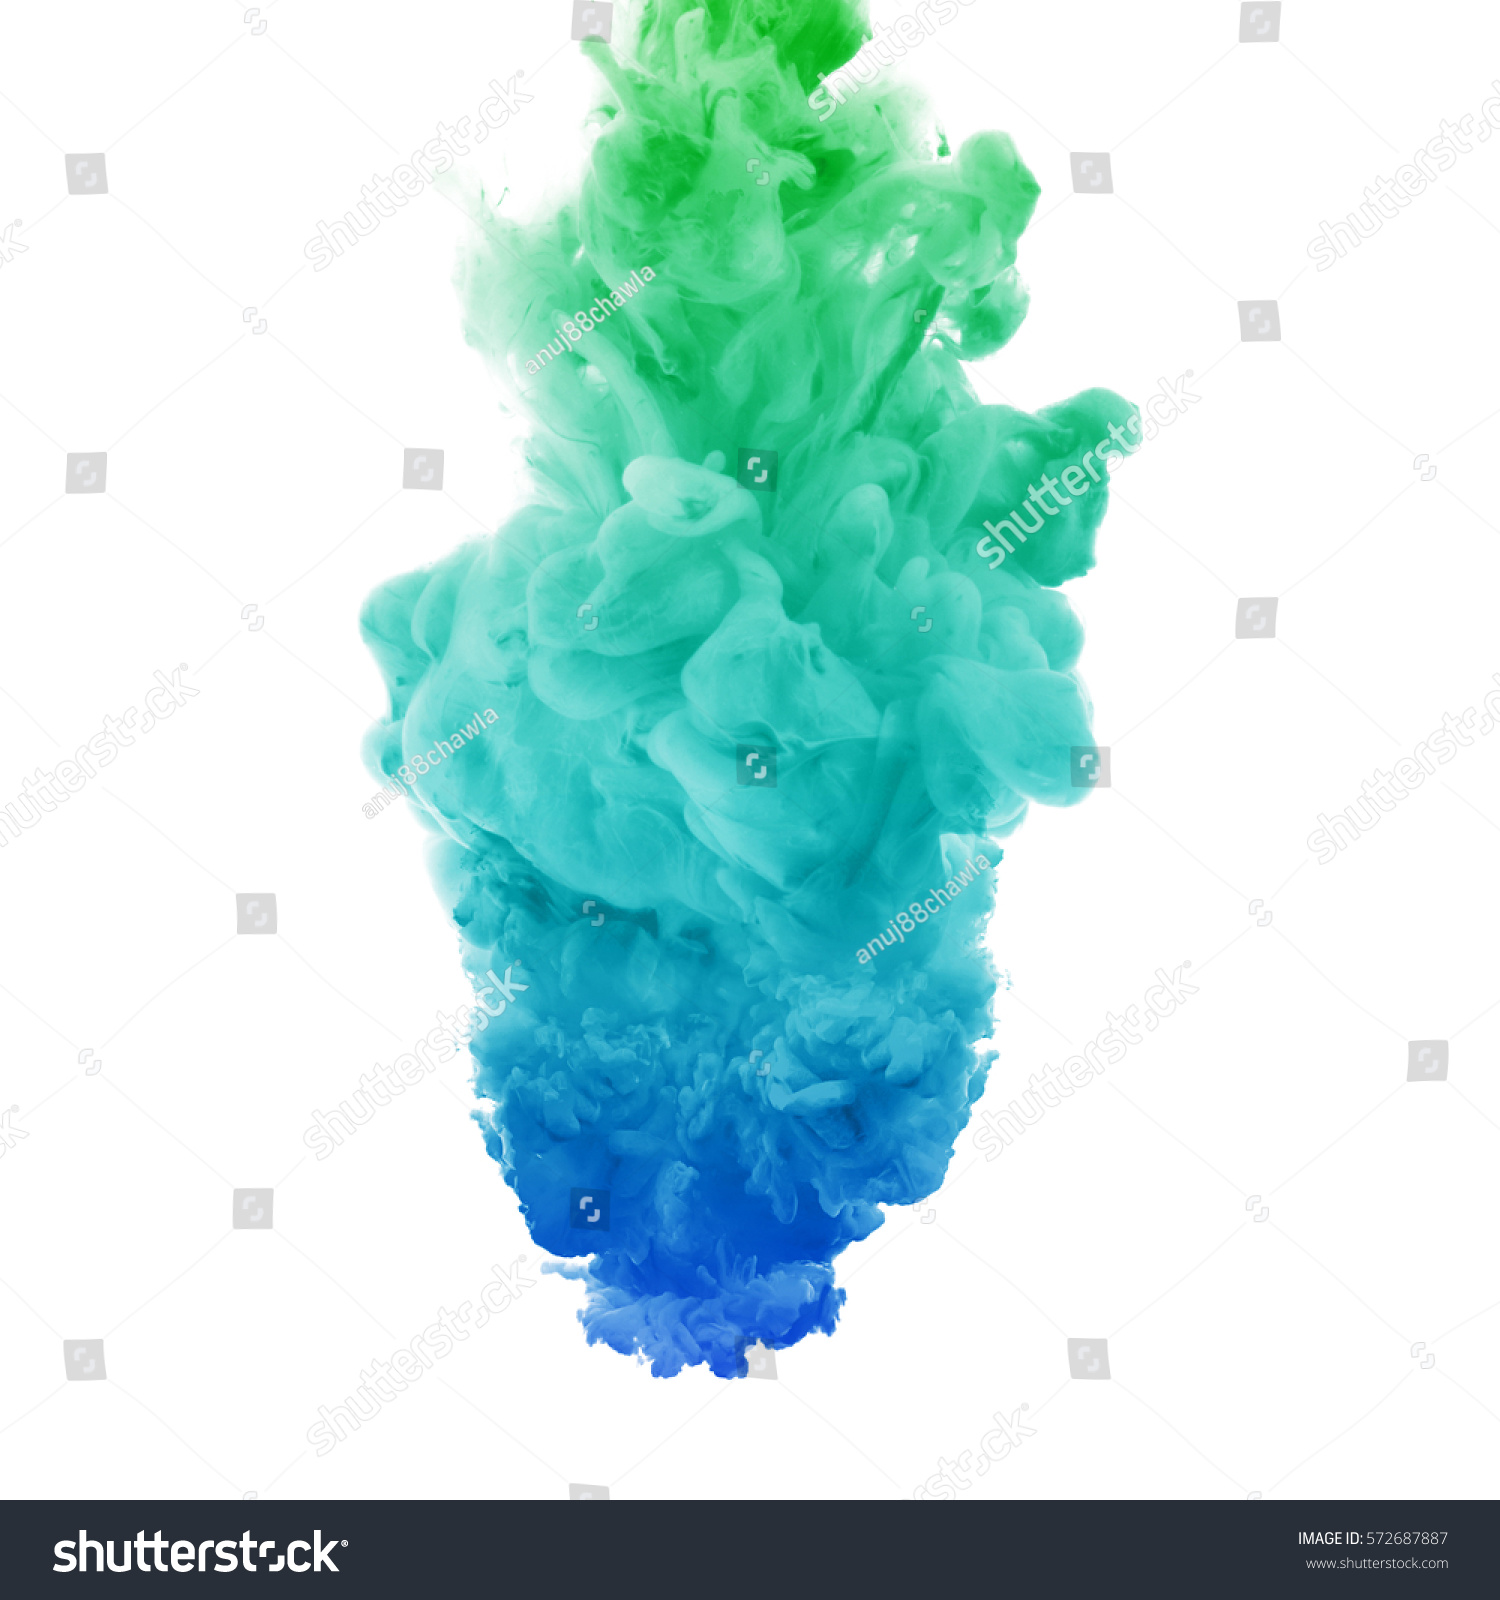 Acrylic Colors Ink Water Ink Swirling Stock Photo (Royalty Free ...